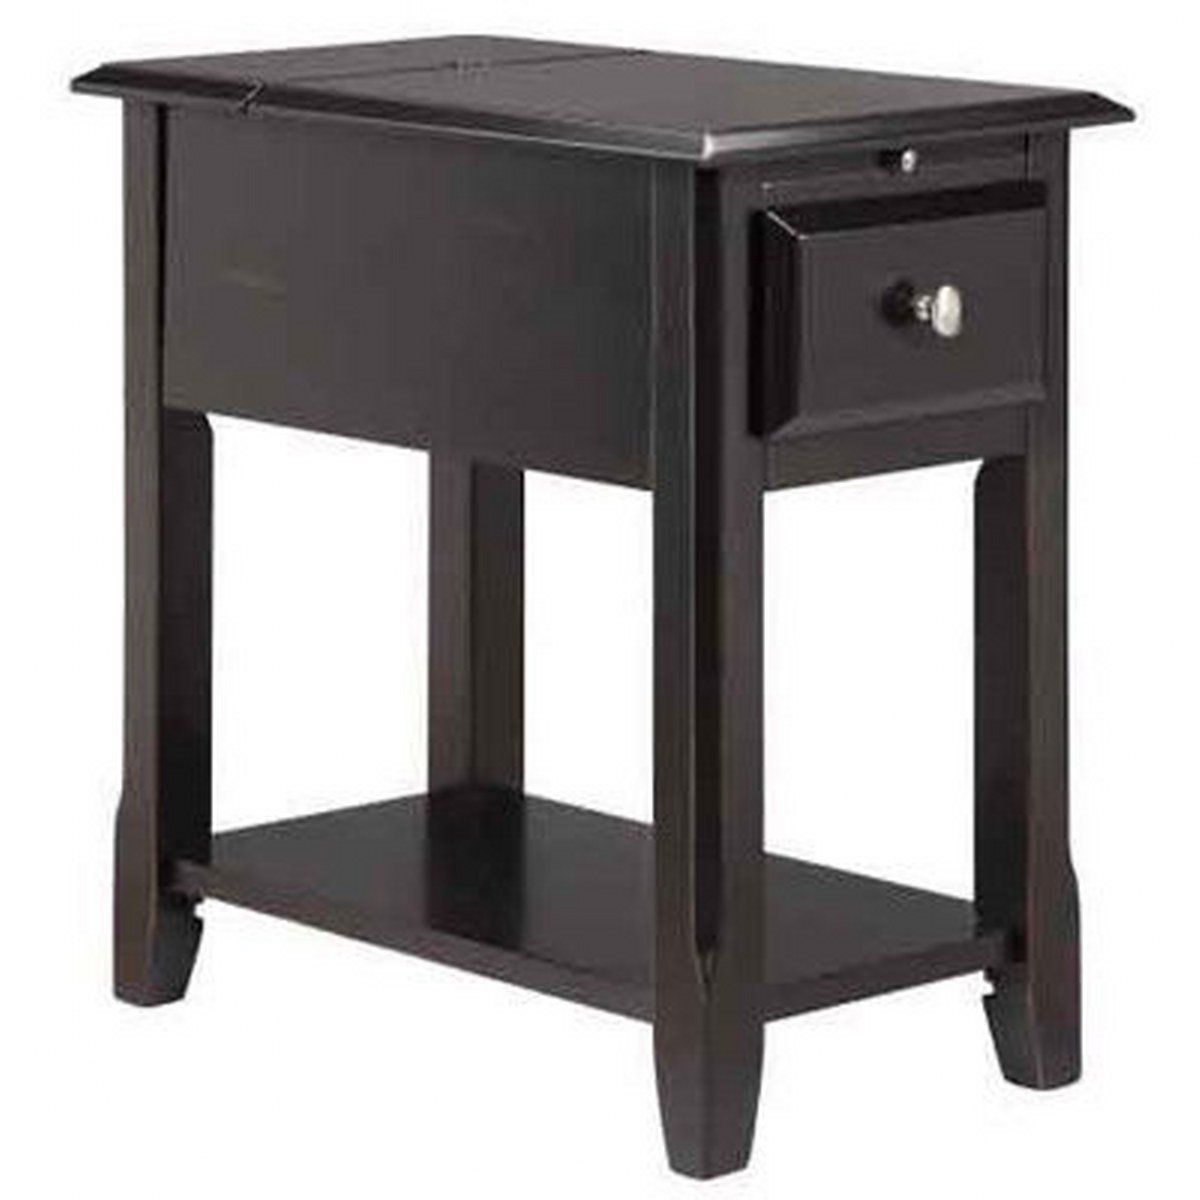 modern style narrow nightstand rectangle wooden black chairsider accent table with drawer utility storage tray and lamp shades lighting websites ott box ikea small wine rack